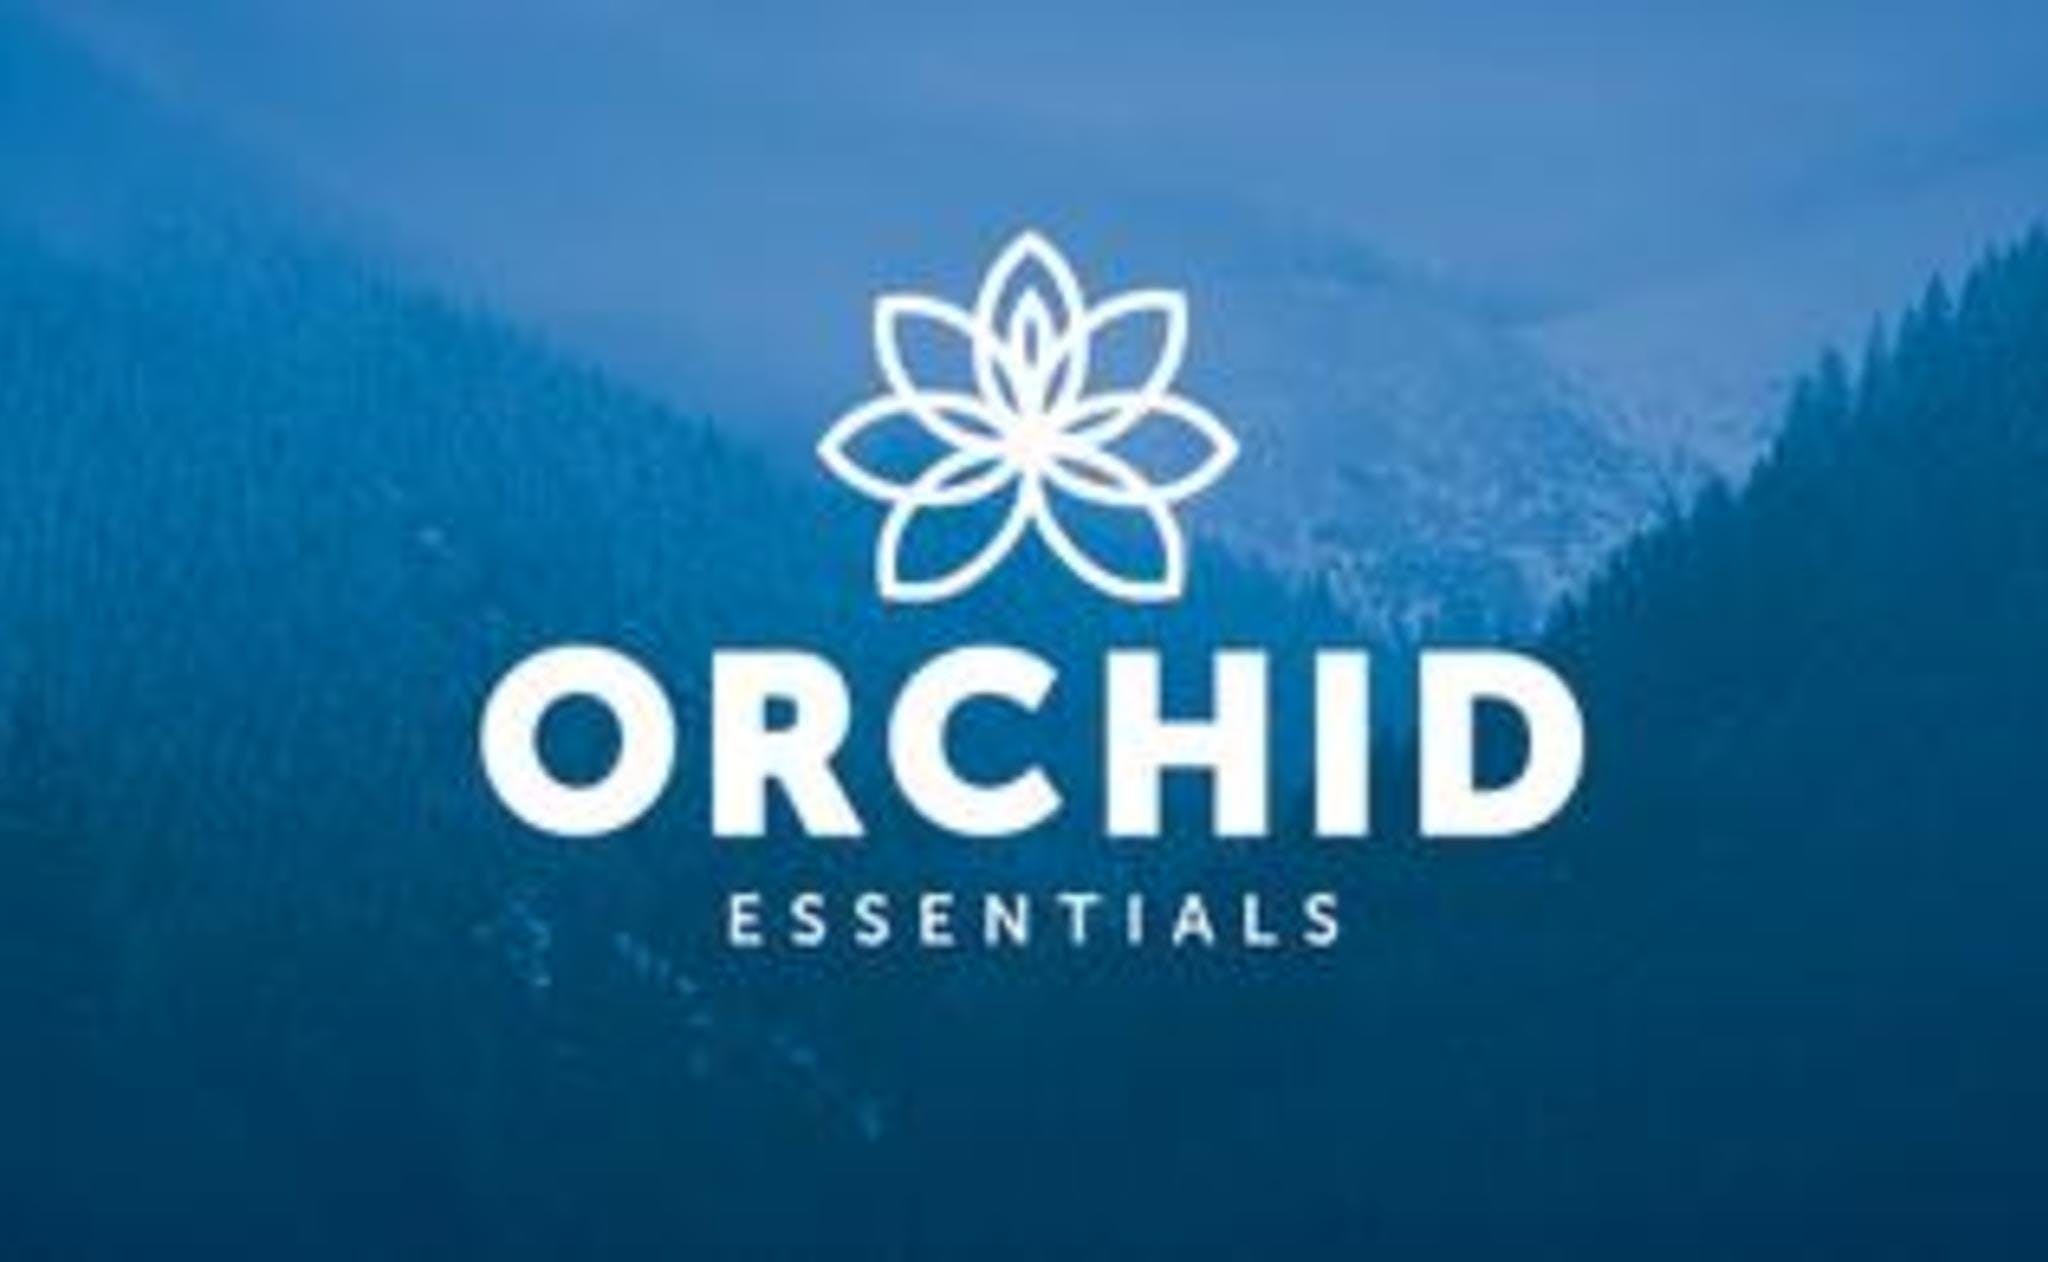 concentrate-orchid-essentials-tahoe-og-oil-cartridge-orchid-12g